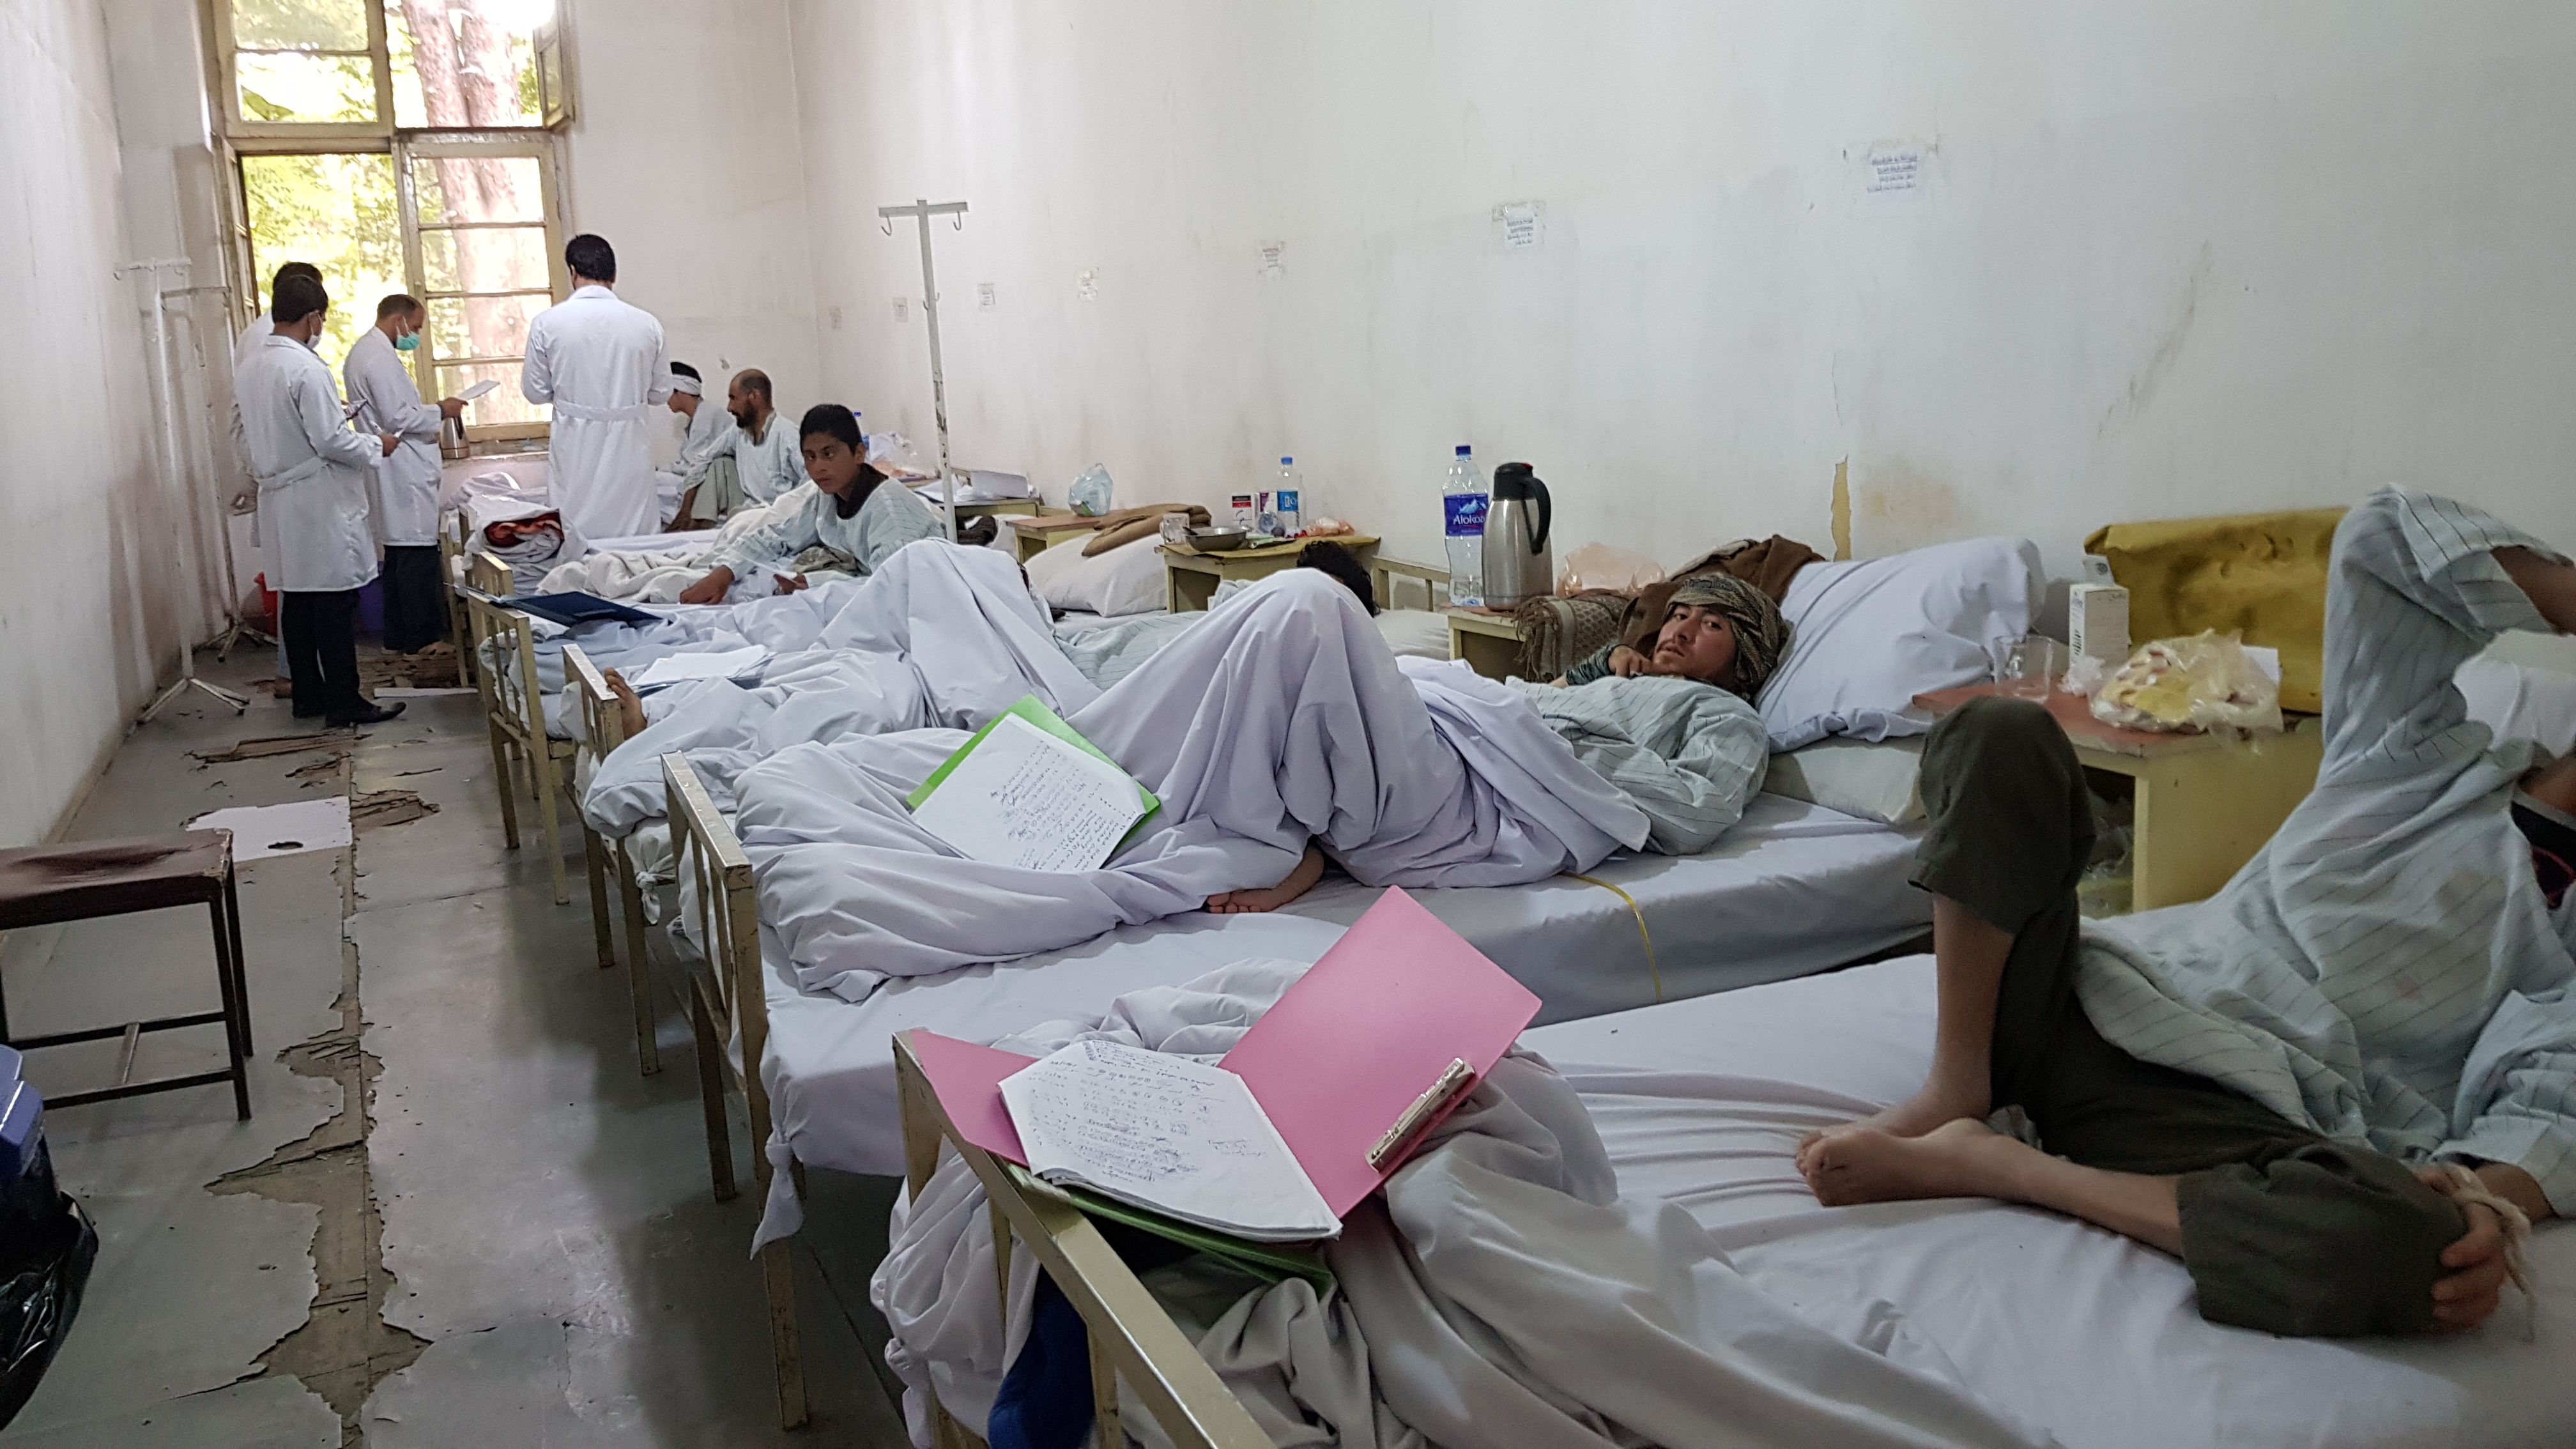 Cases of Severe Diarrhea Spike in Afghanistan: Doctors